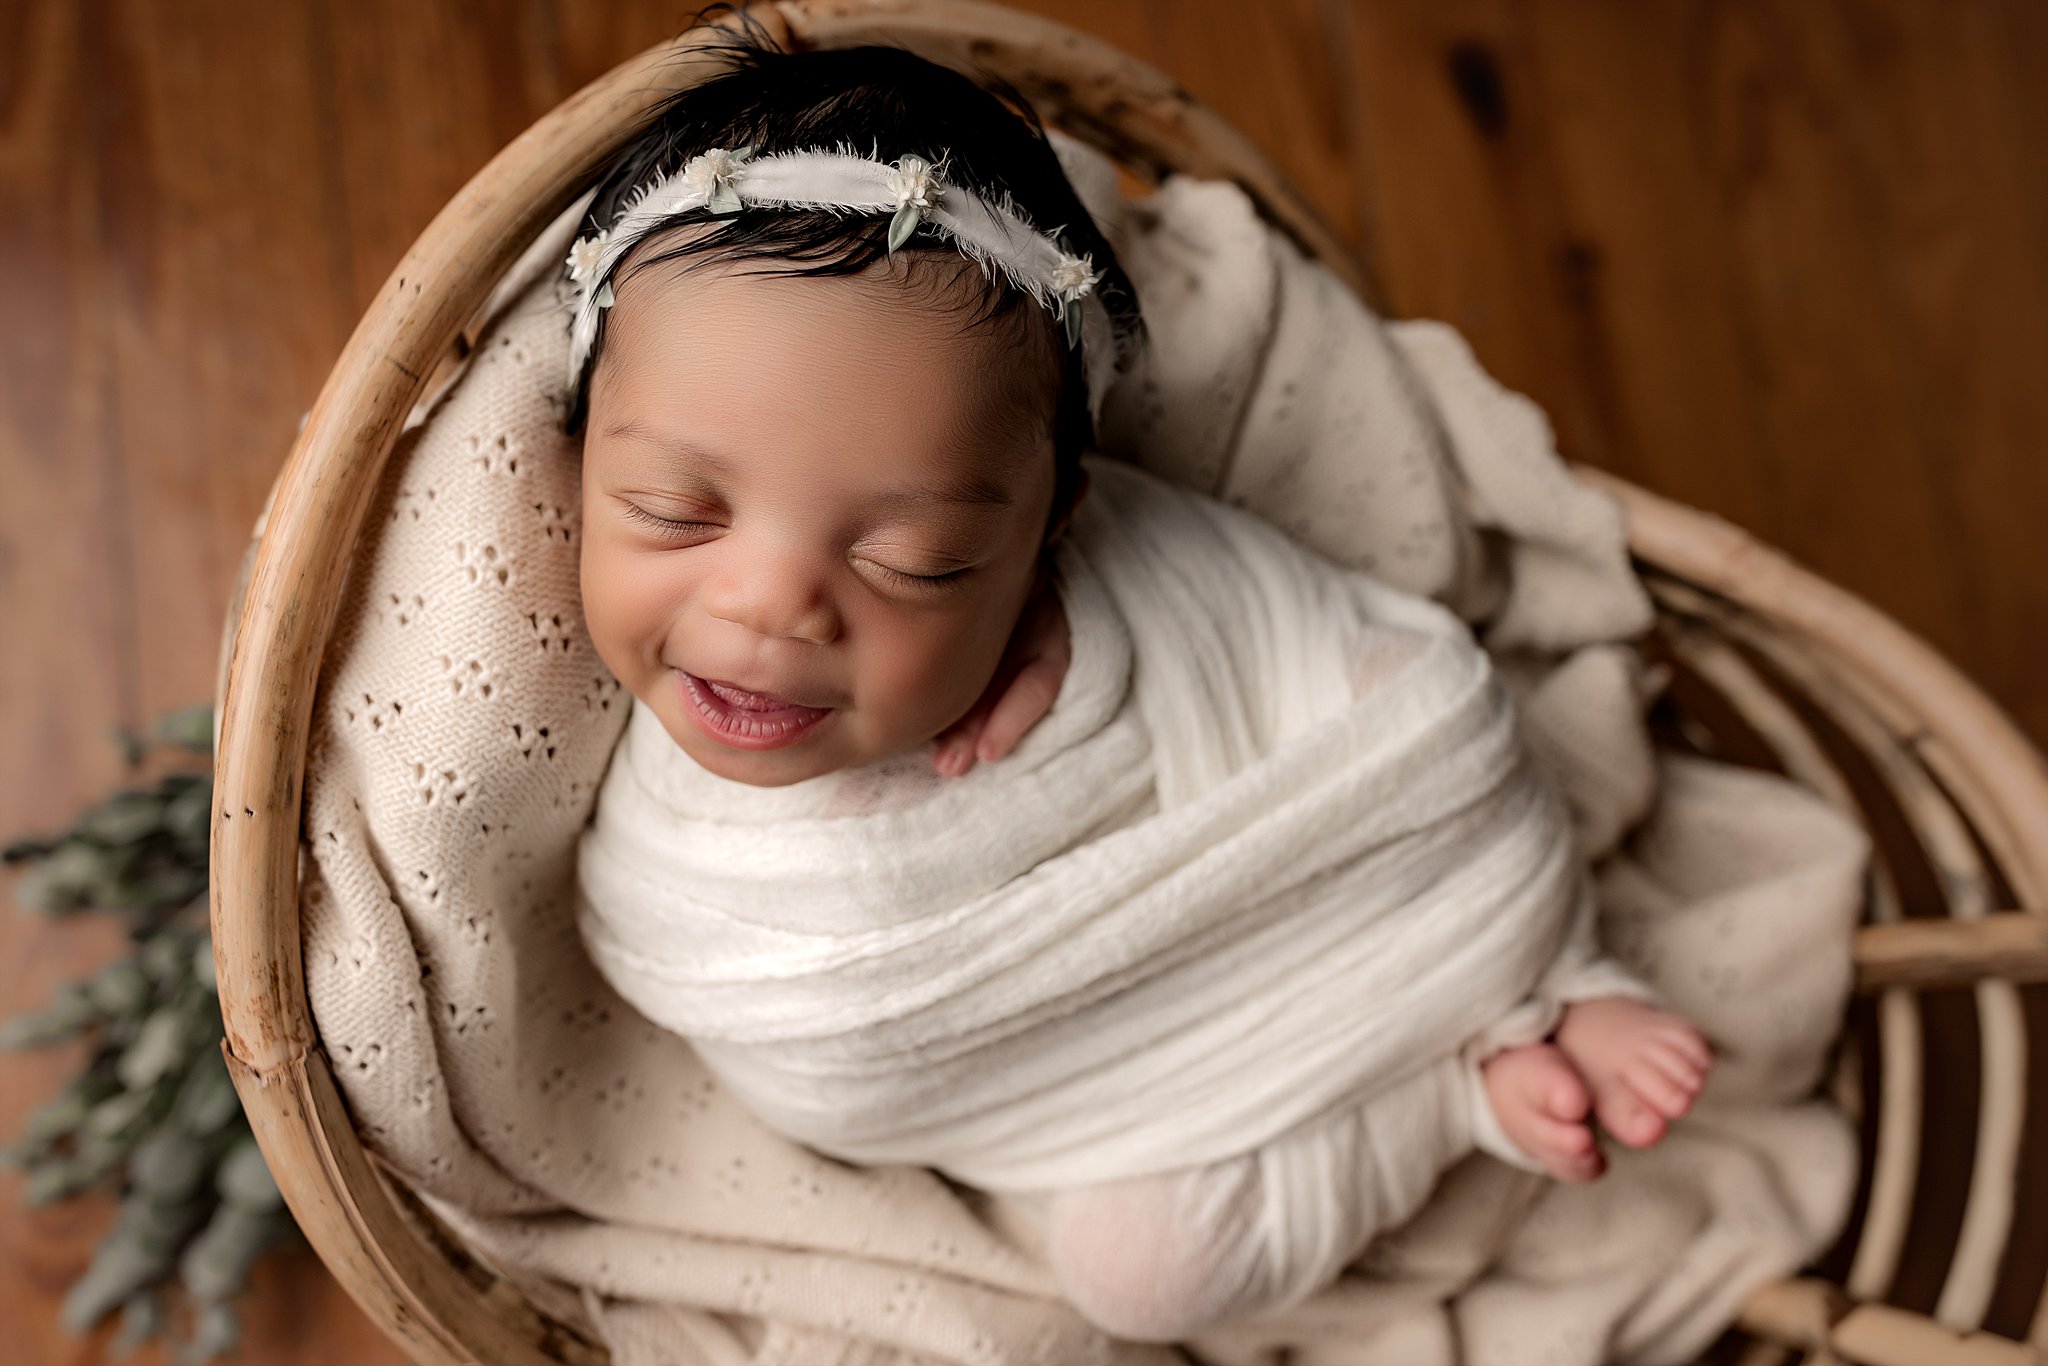 A smiling newborn baby sleeps in a wicker basket and white swaddle your happy nest